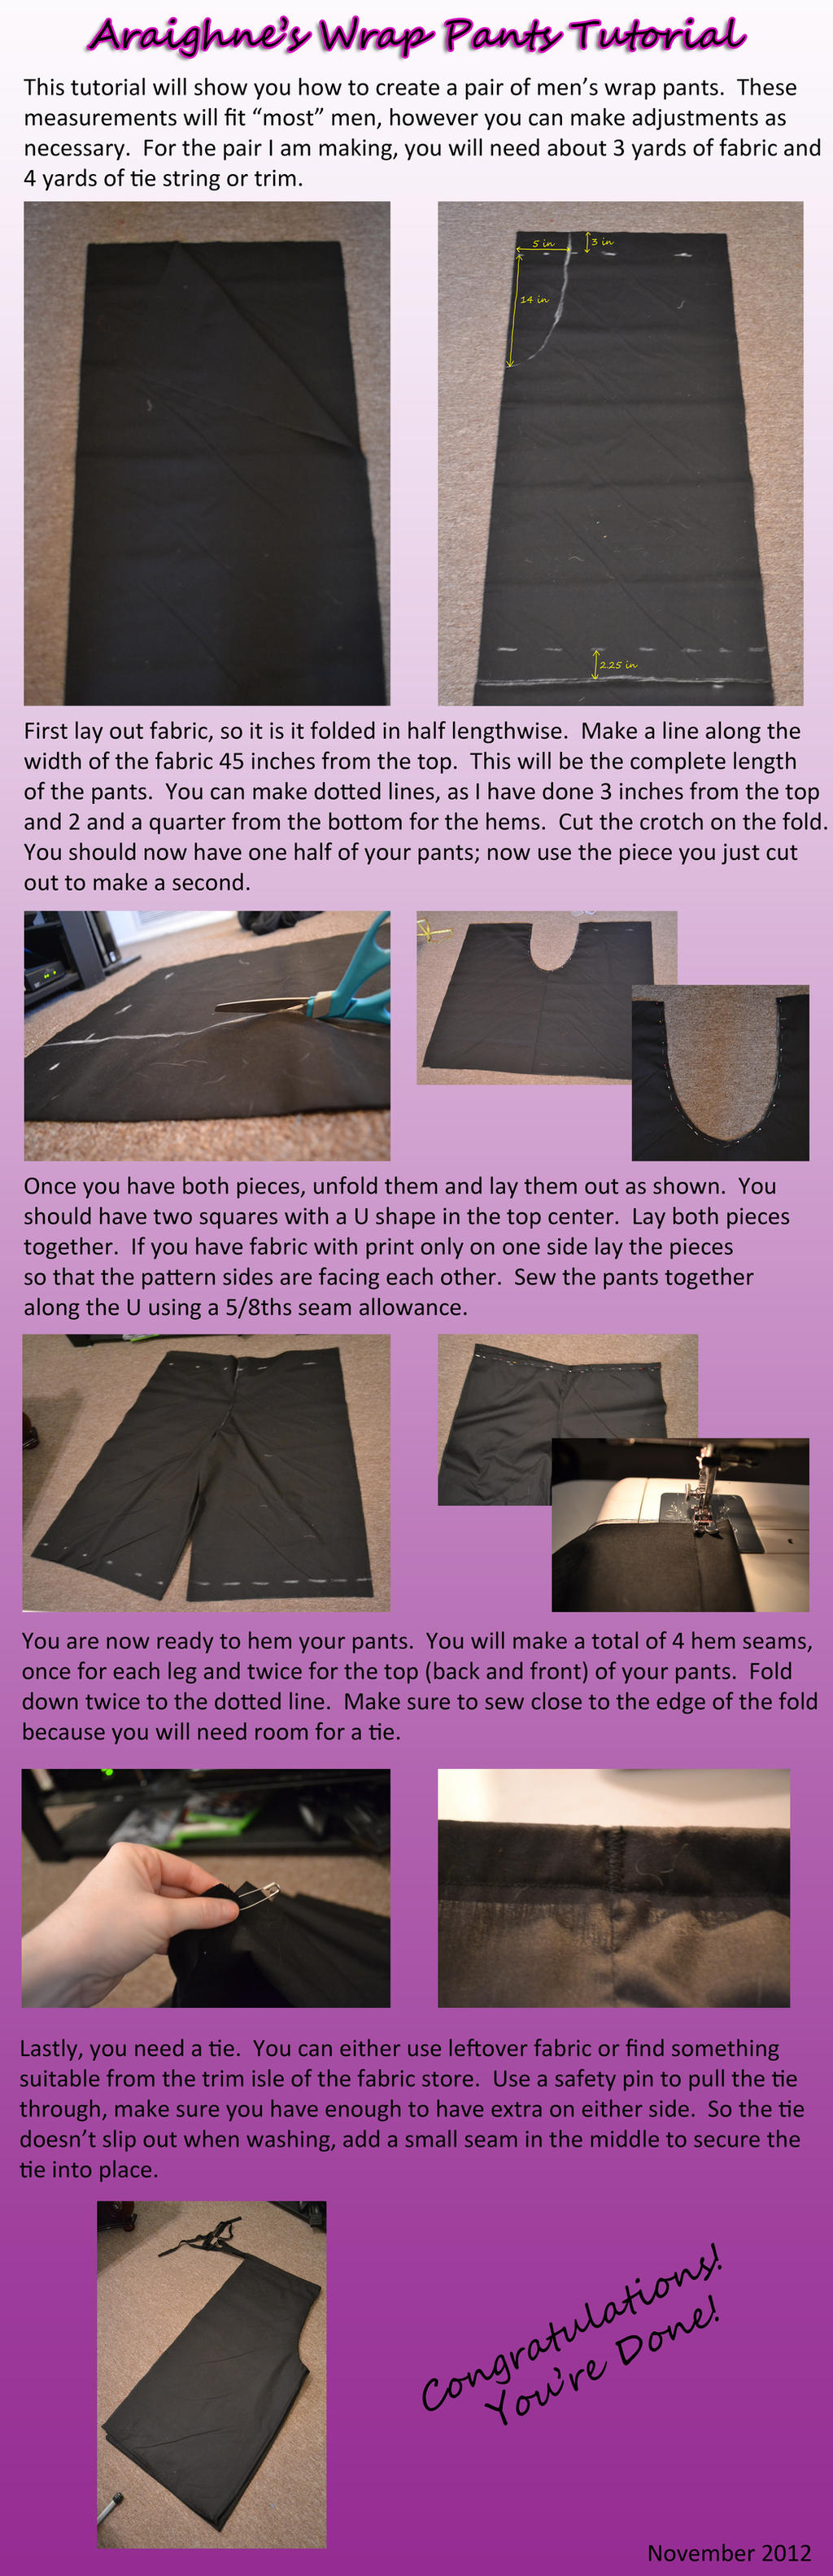 Wrap Pants Tutorial by PinkJusticeCosplay on DeviantArt